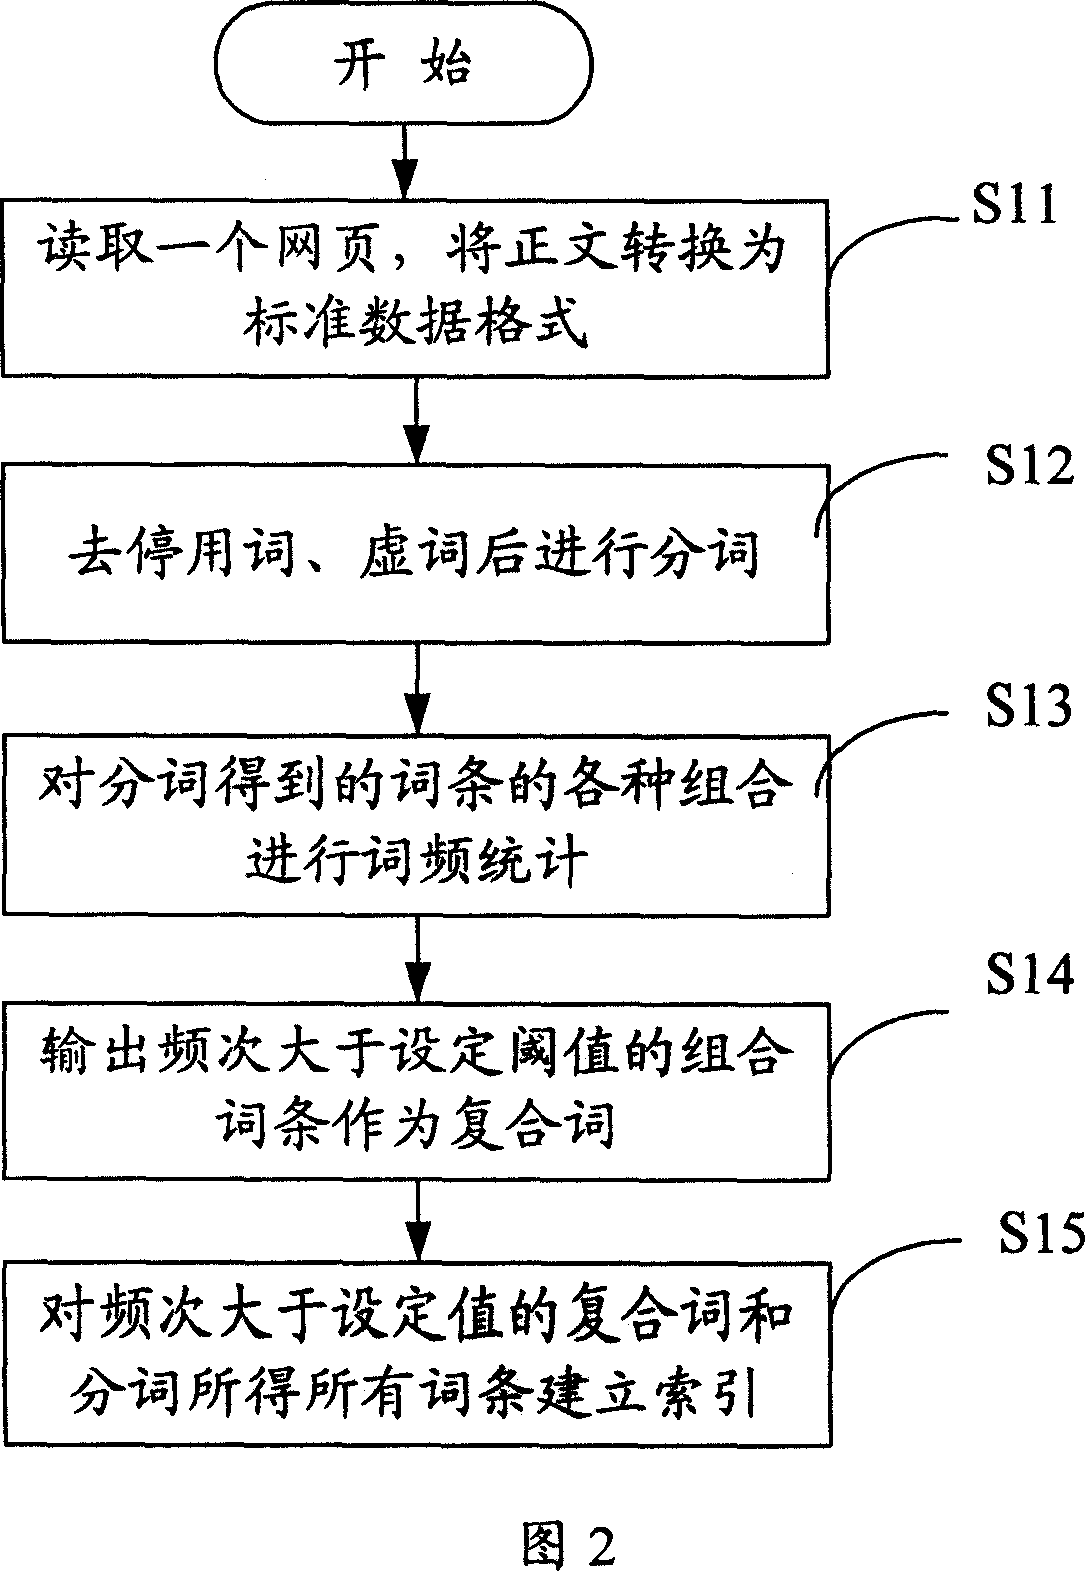 Retrieving method and system